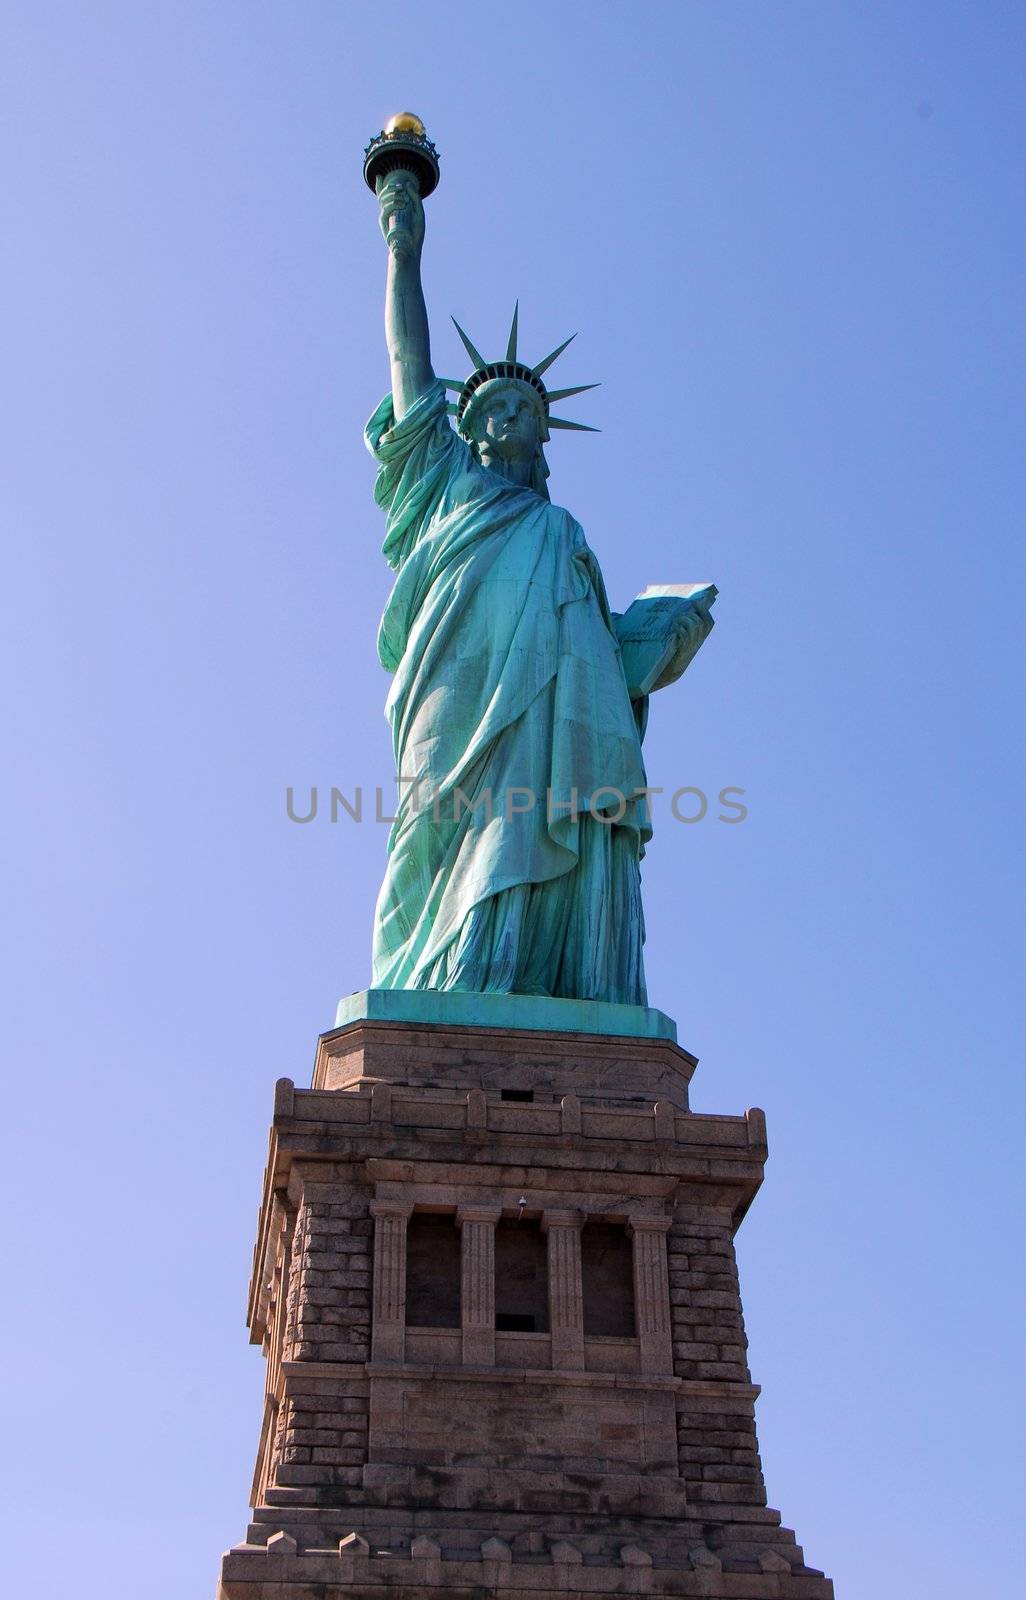 Statue of Liberty a popular tourist attraction in in New York City USA